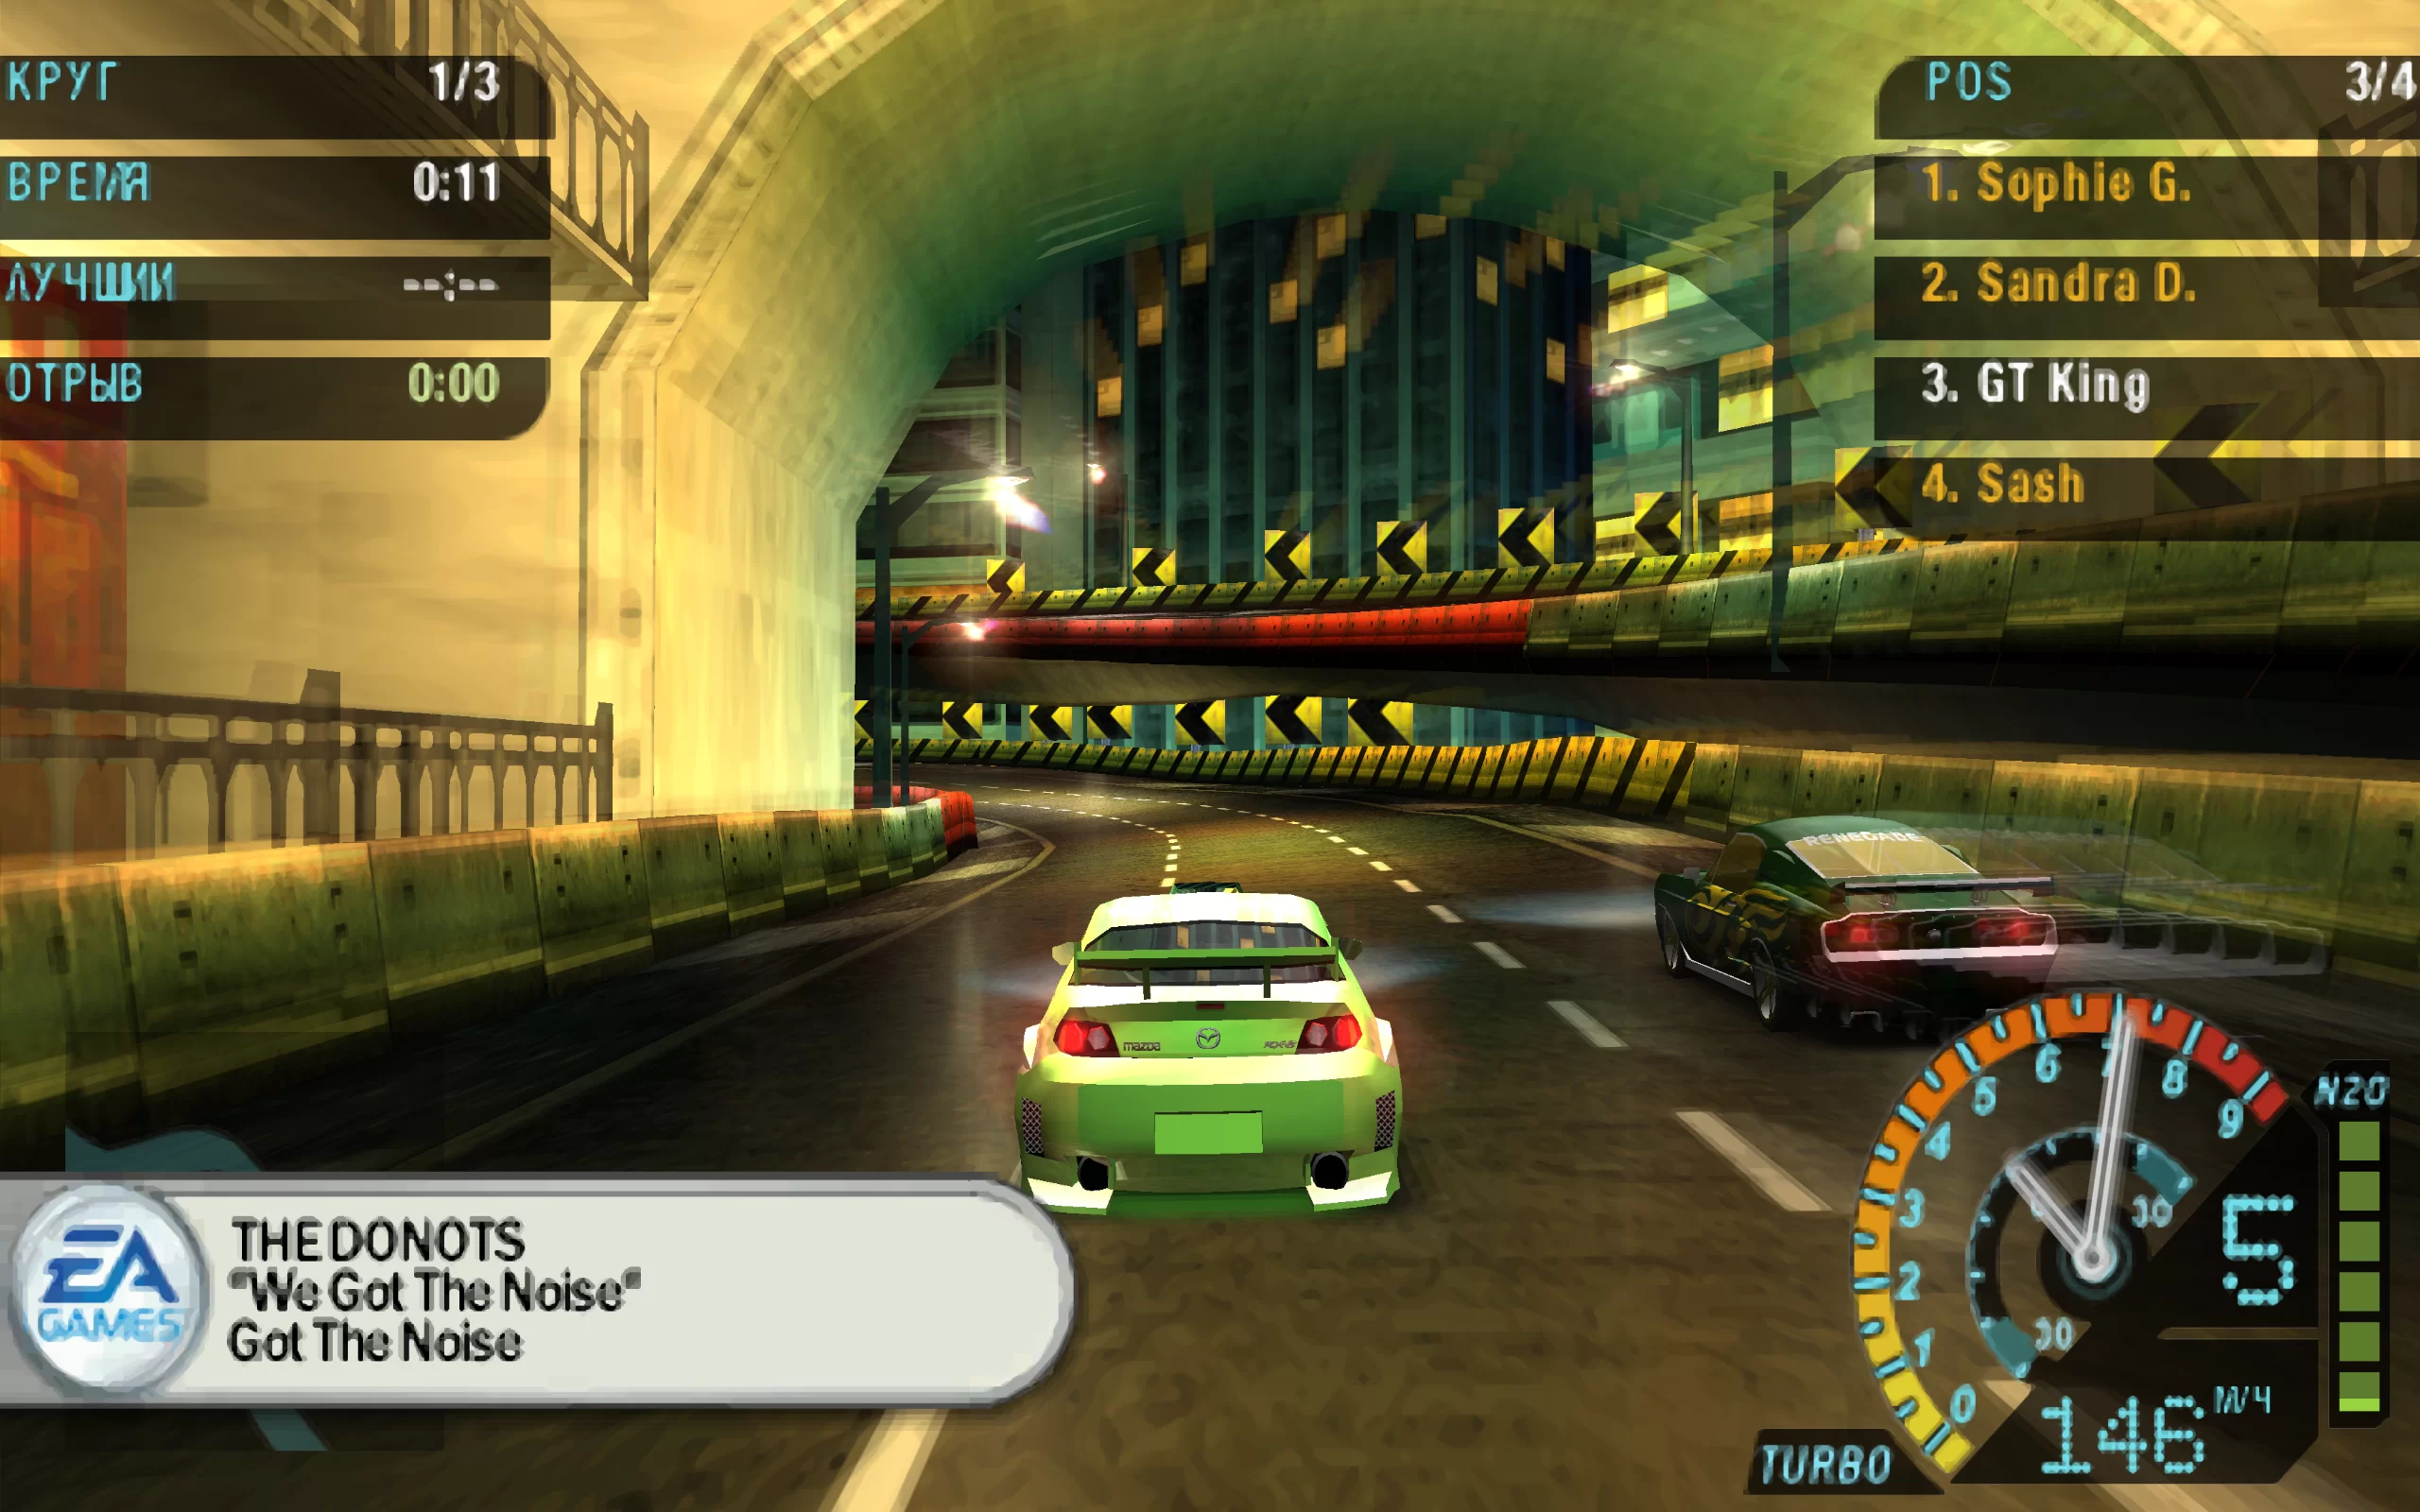 Need for Speed: Underground Rivals PSP (PlayStation Portable)